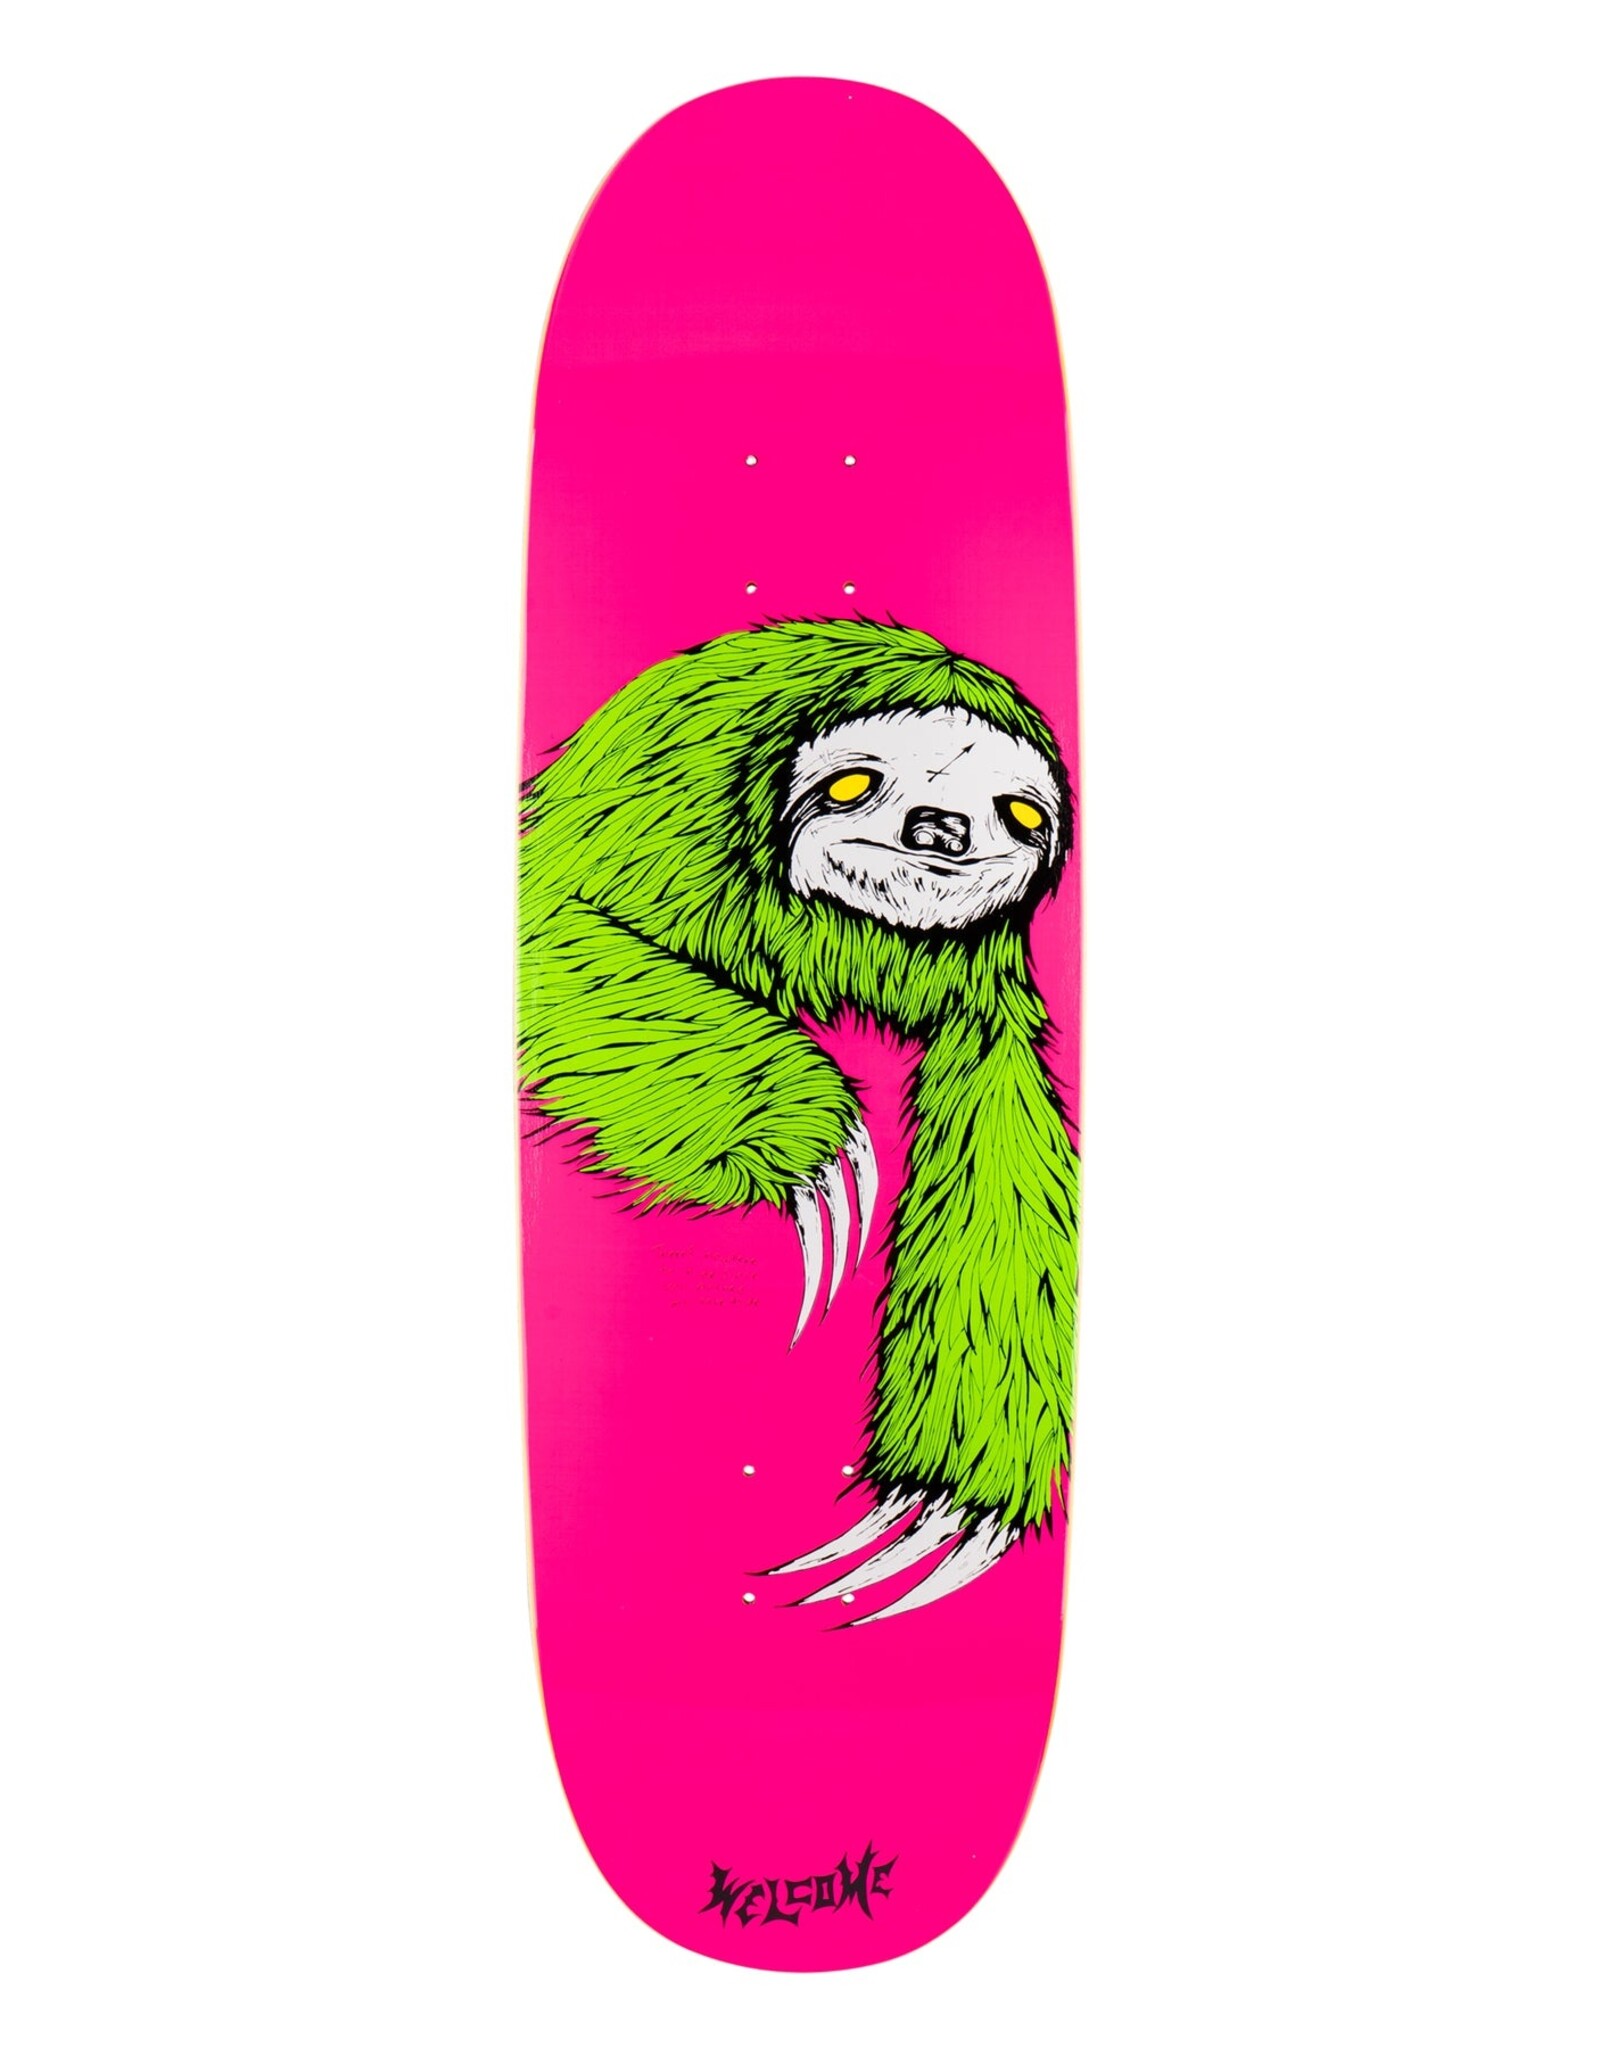 WELCOME - SLOTH DECK - 9.5